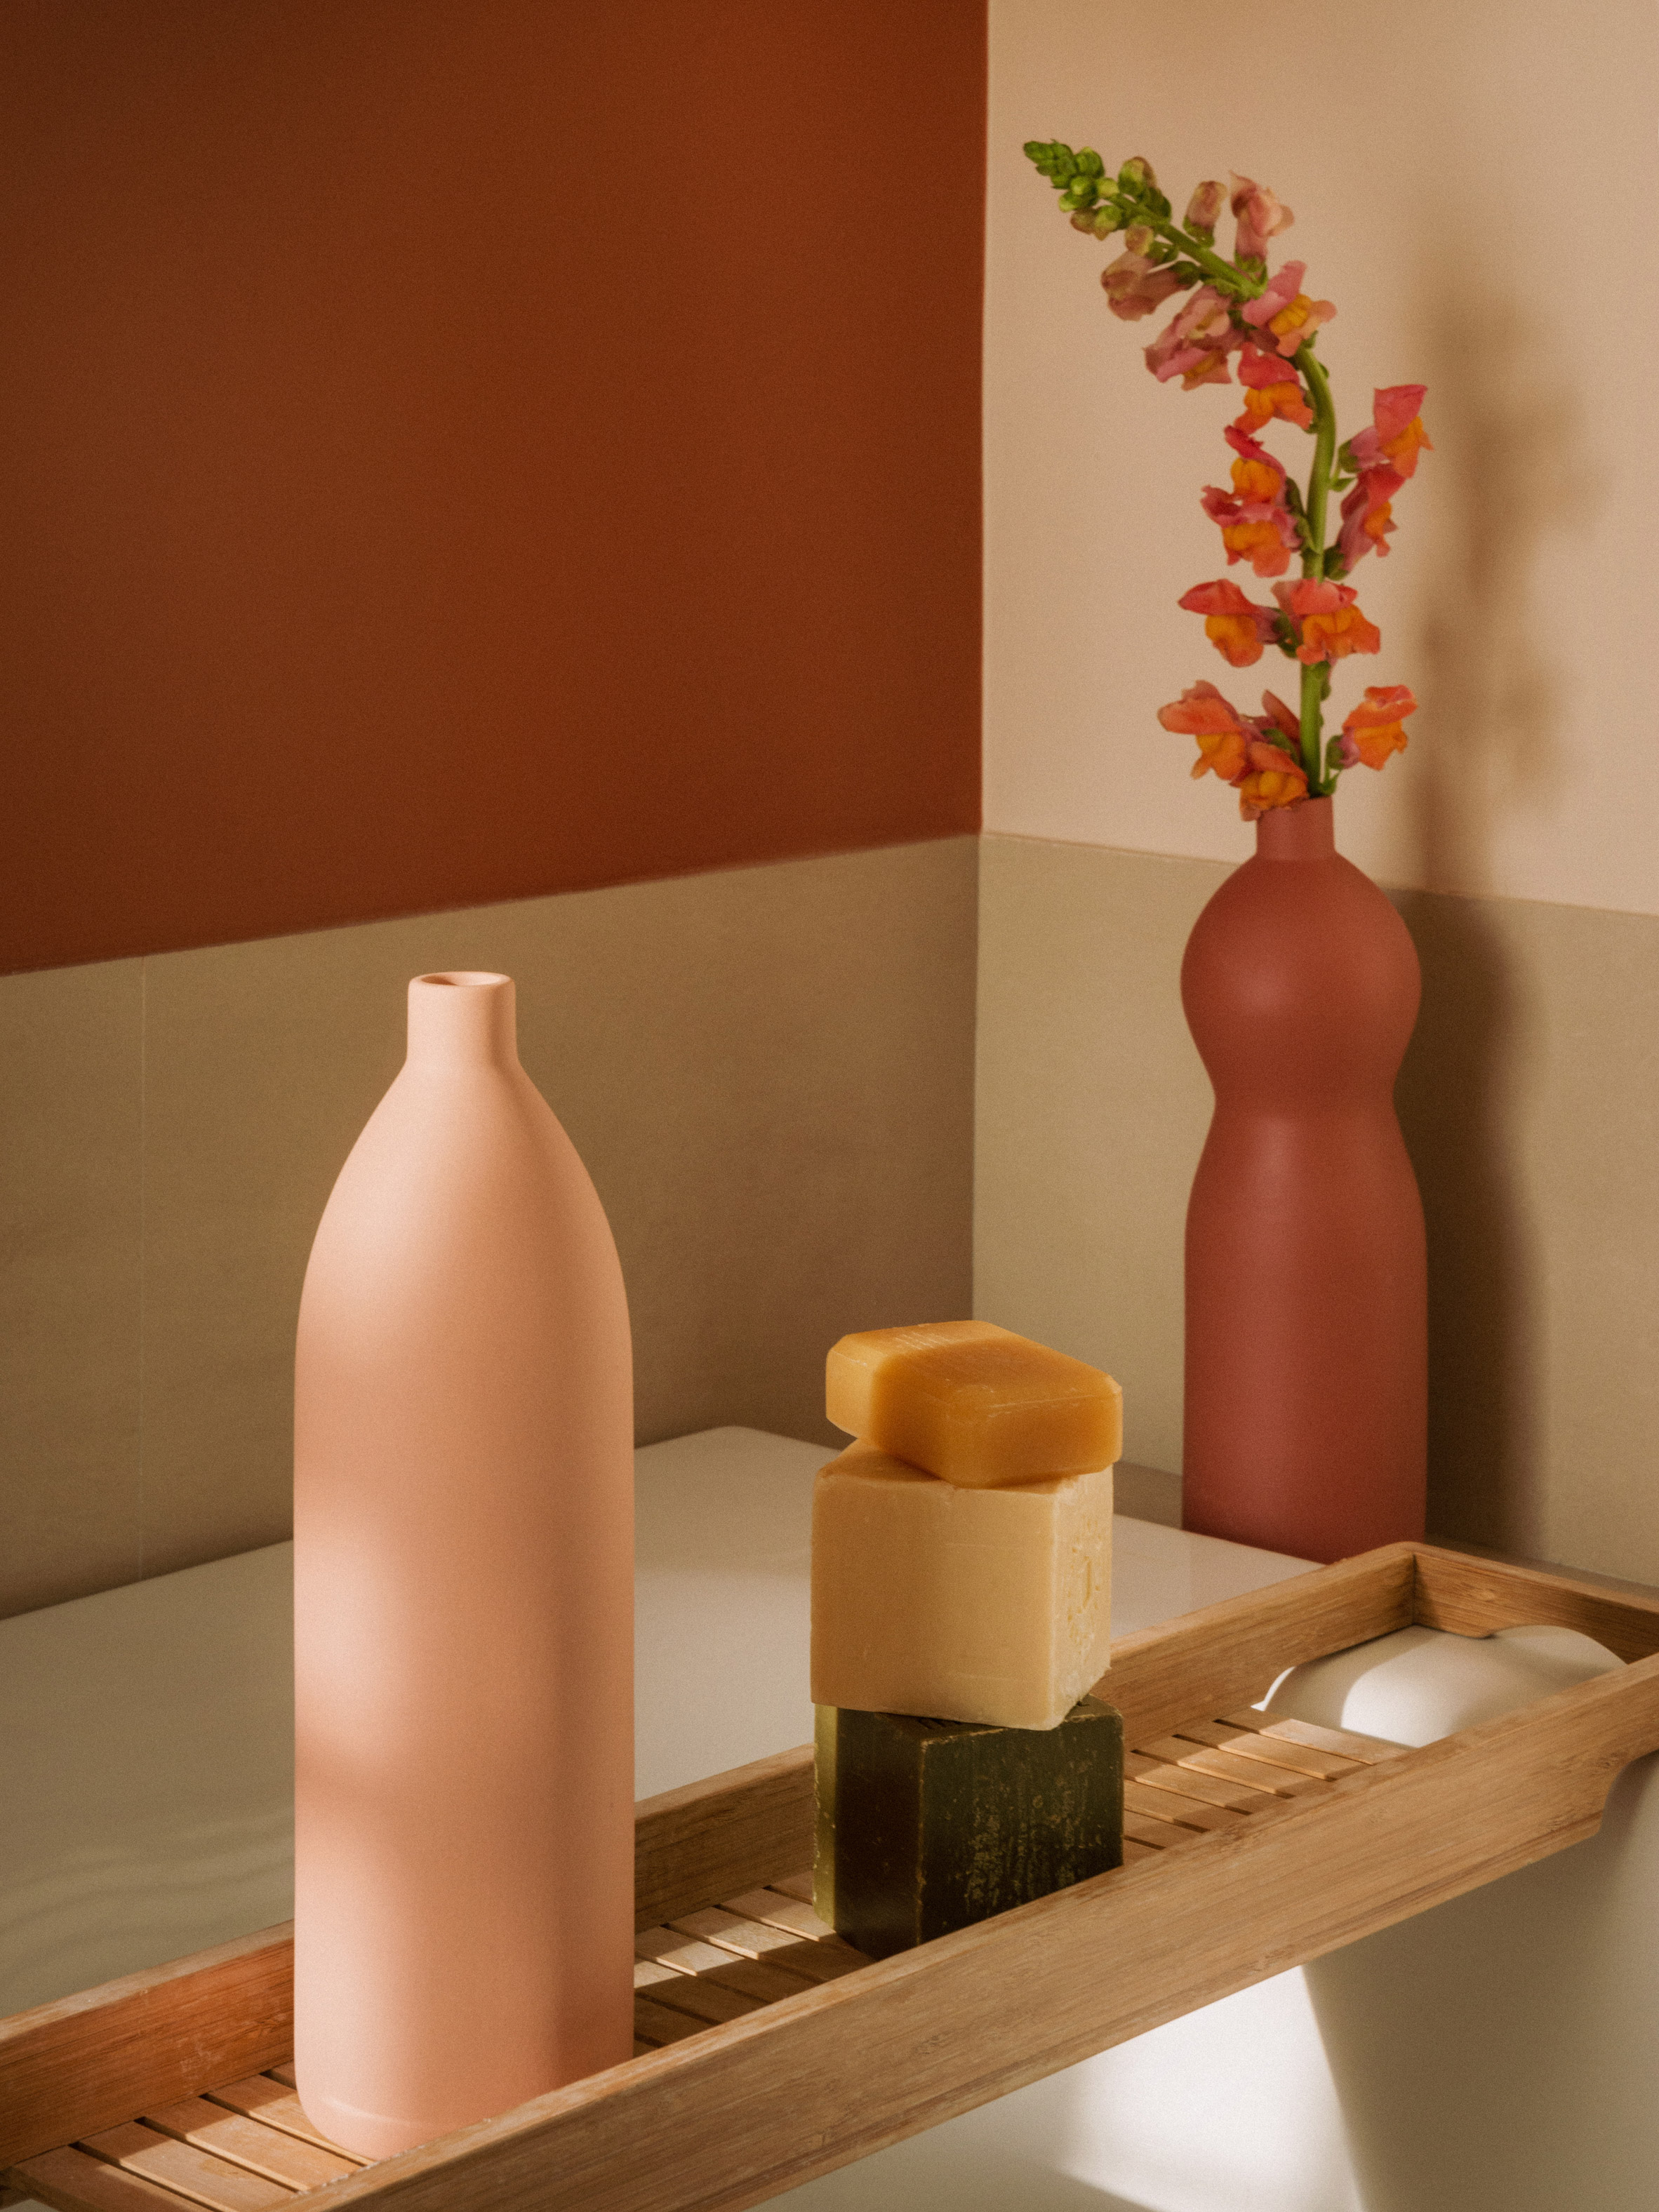 Goodmoods' handmade sandstone bottles are a "satire of our plastic use"